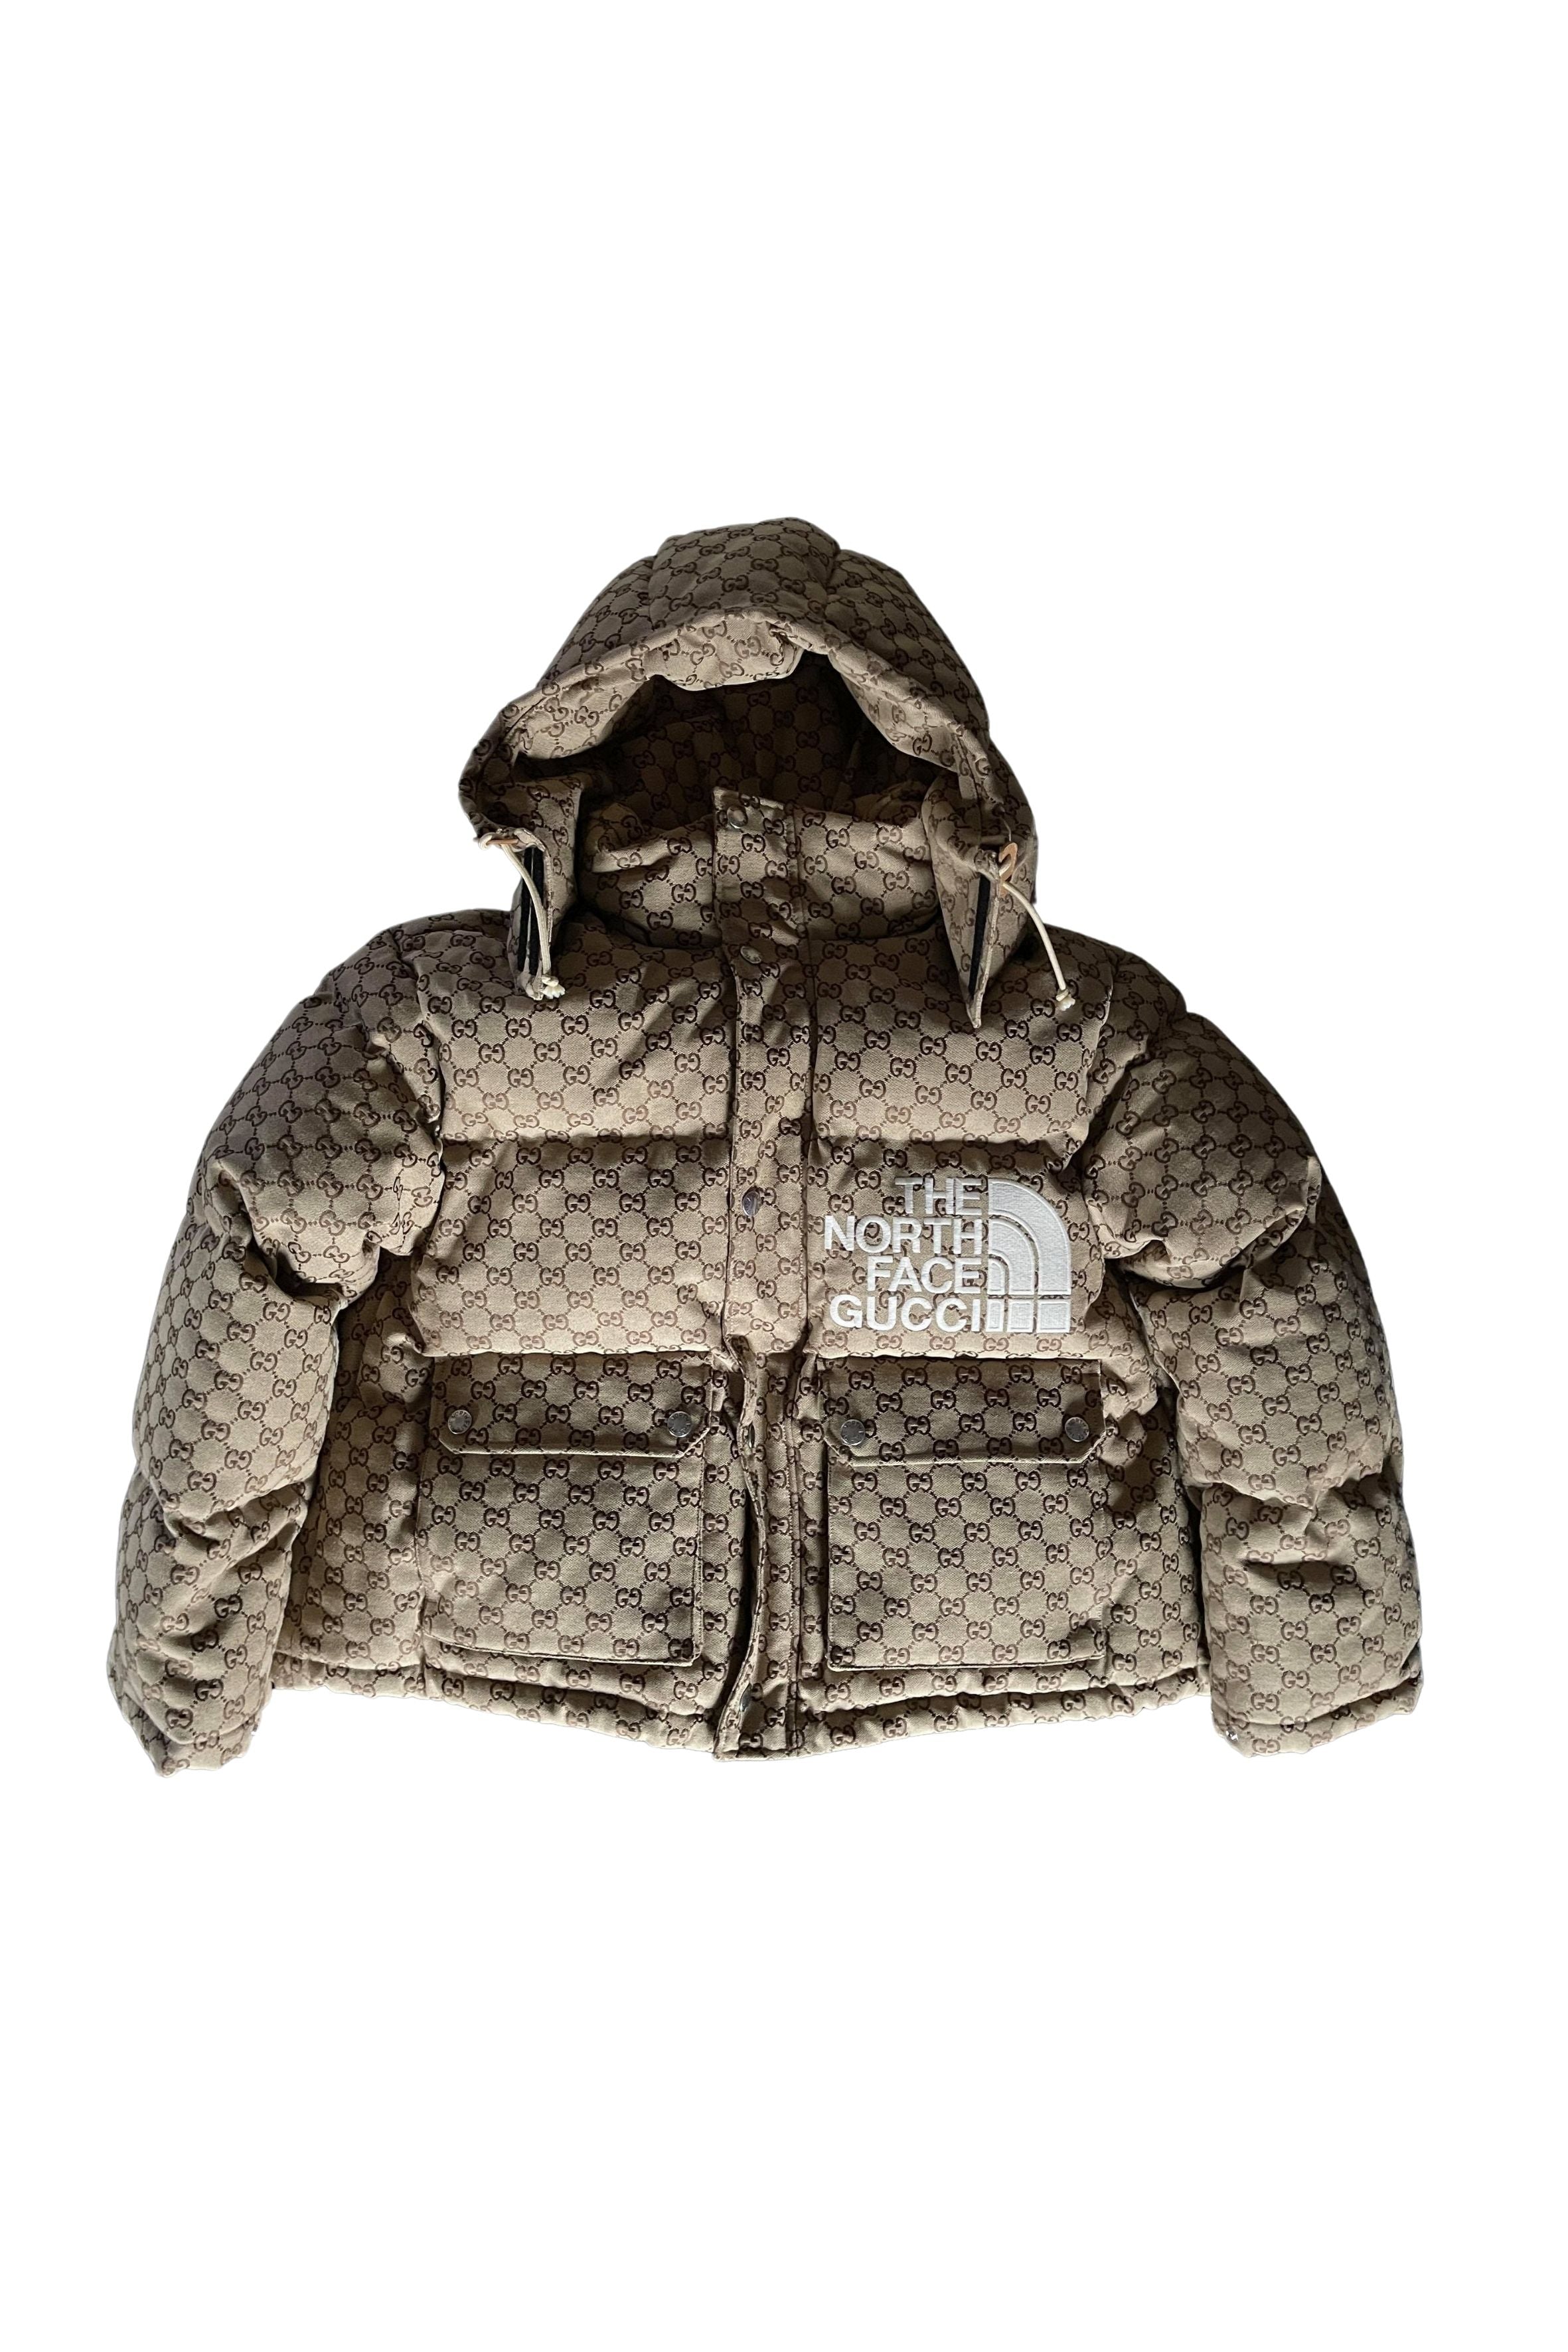 Gucci x The North Face Padded Jacket Green Men's - FW21 - US